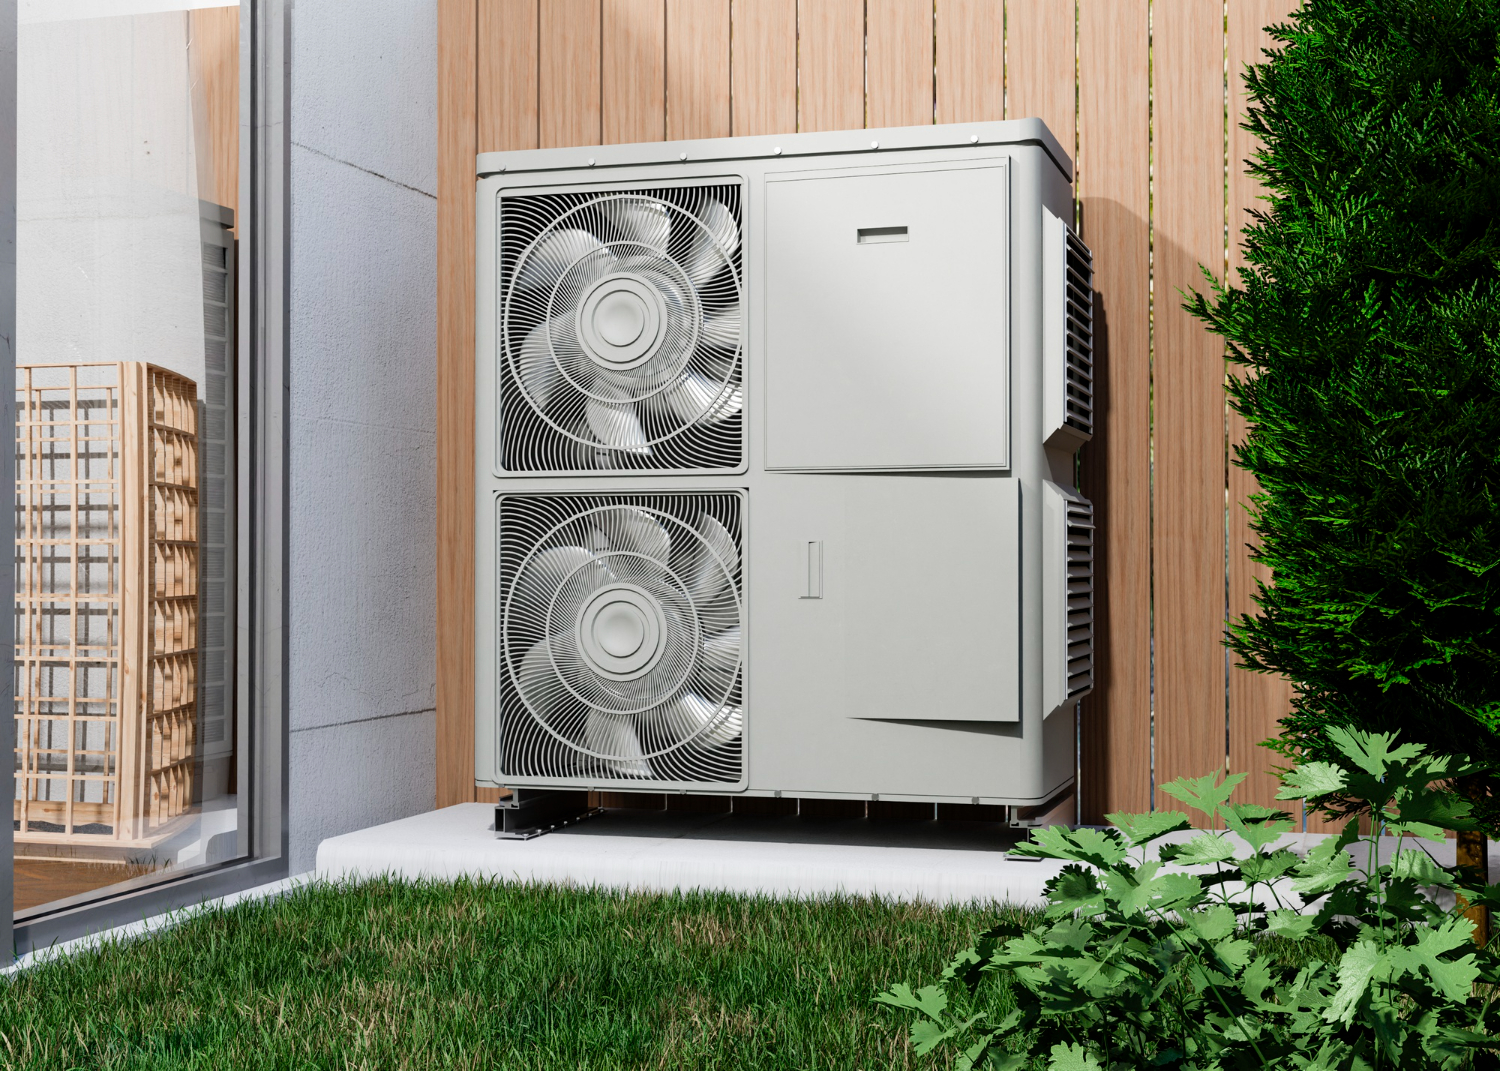 How a heat pump could work for your home